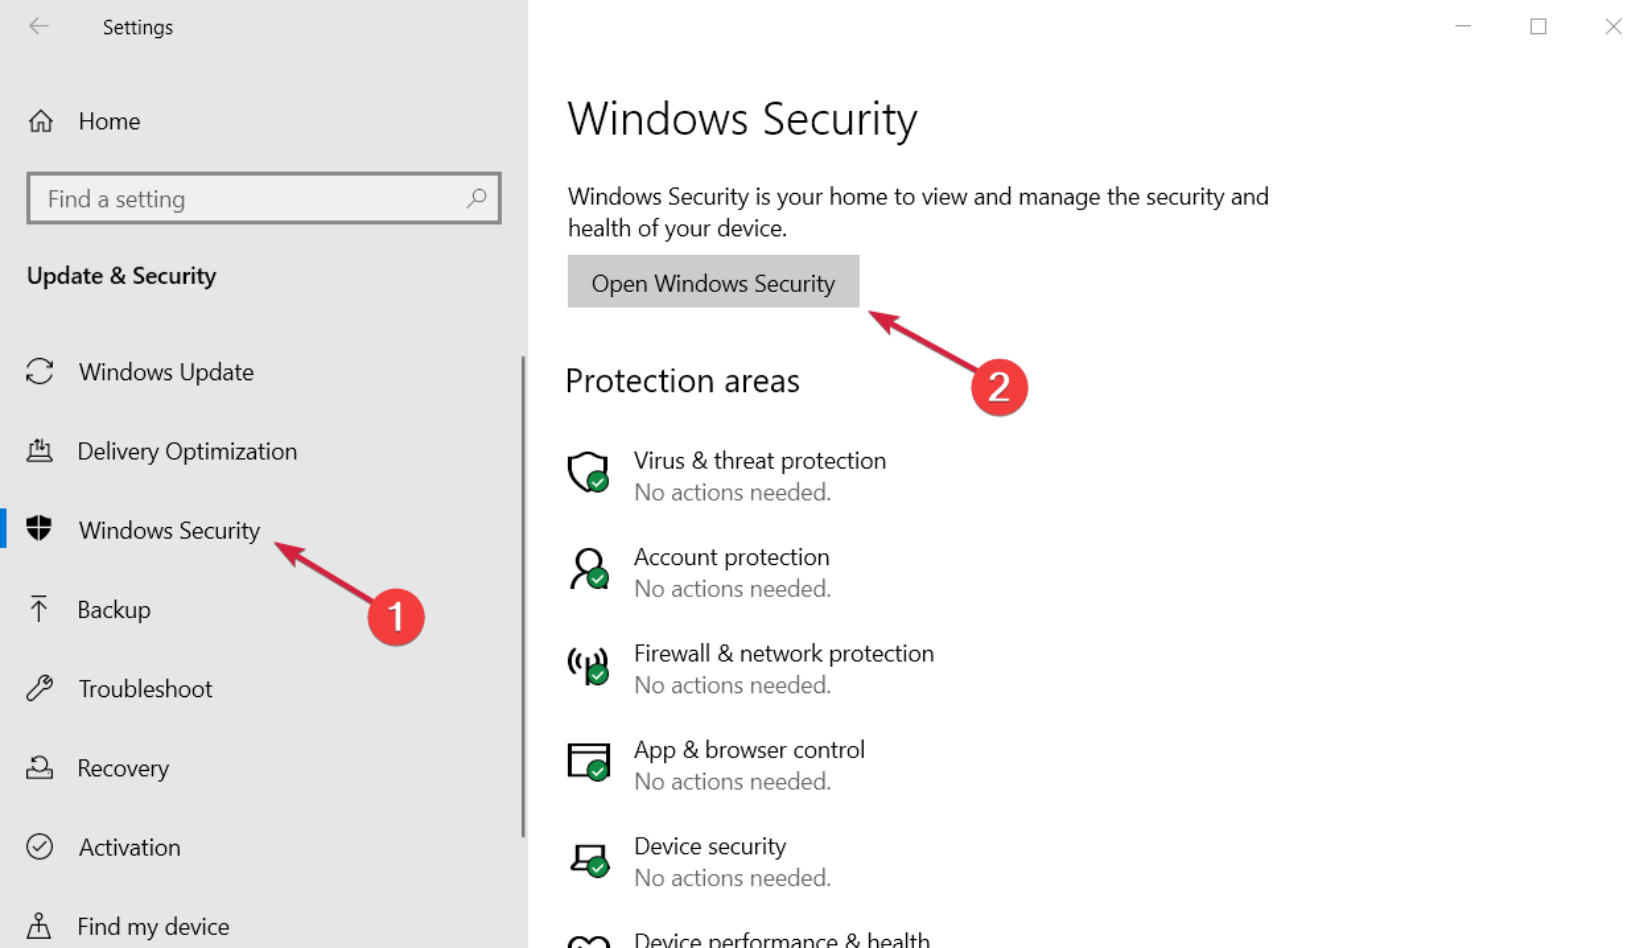 Open Windows Security in the right panel